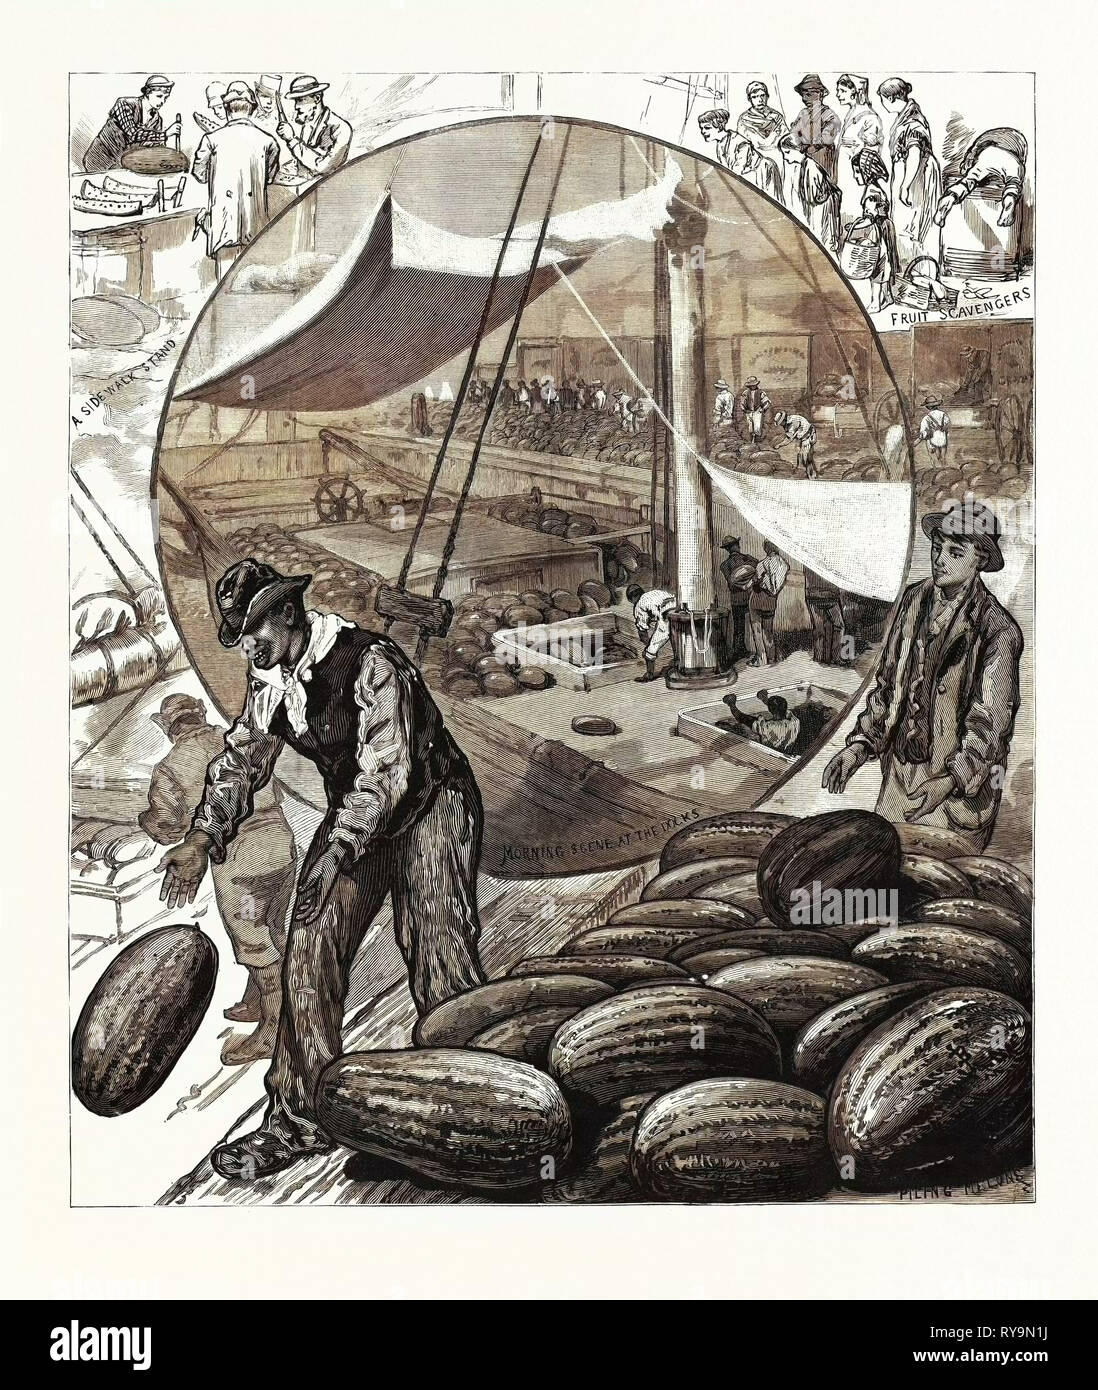 New York: Incidents of the Watermelon Trade in the Metropolis, U.S., Engraving 1880 1881 Stock Photo